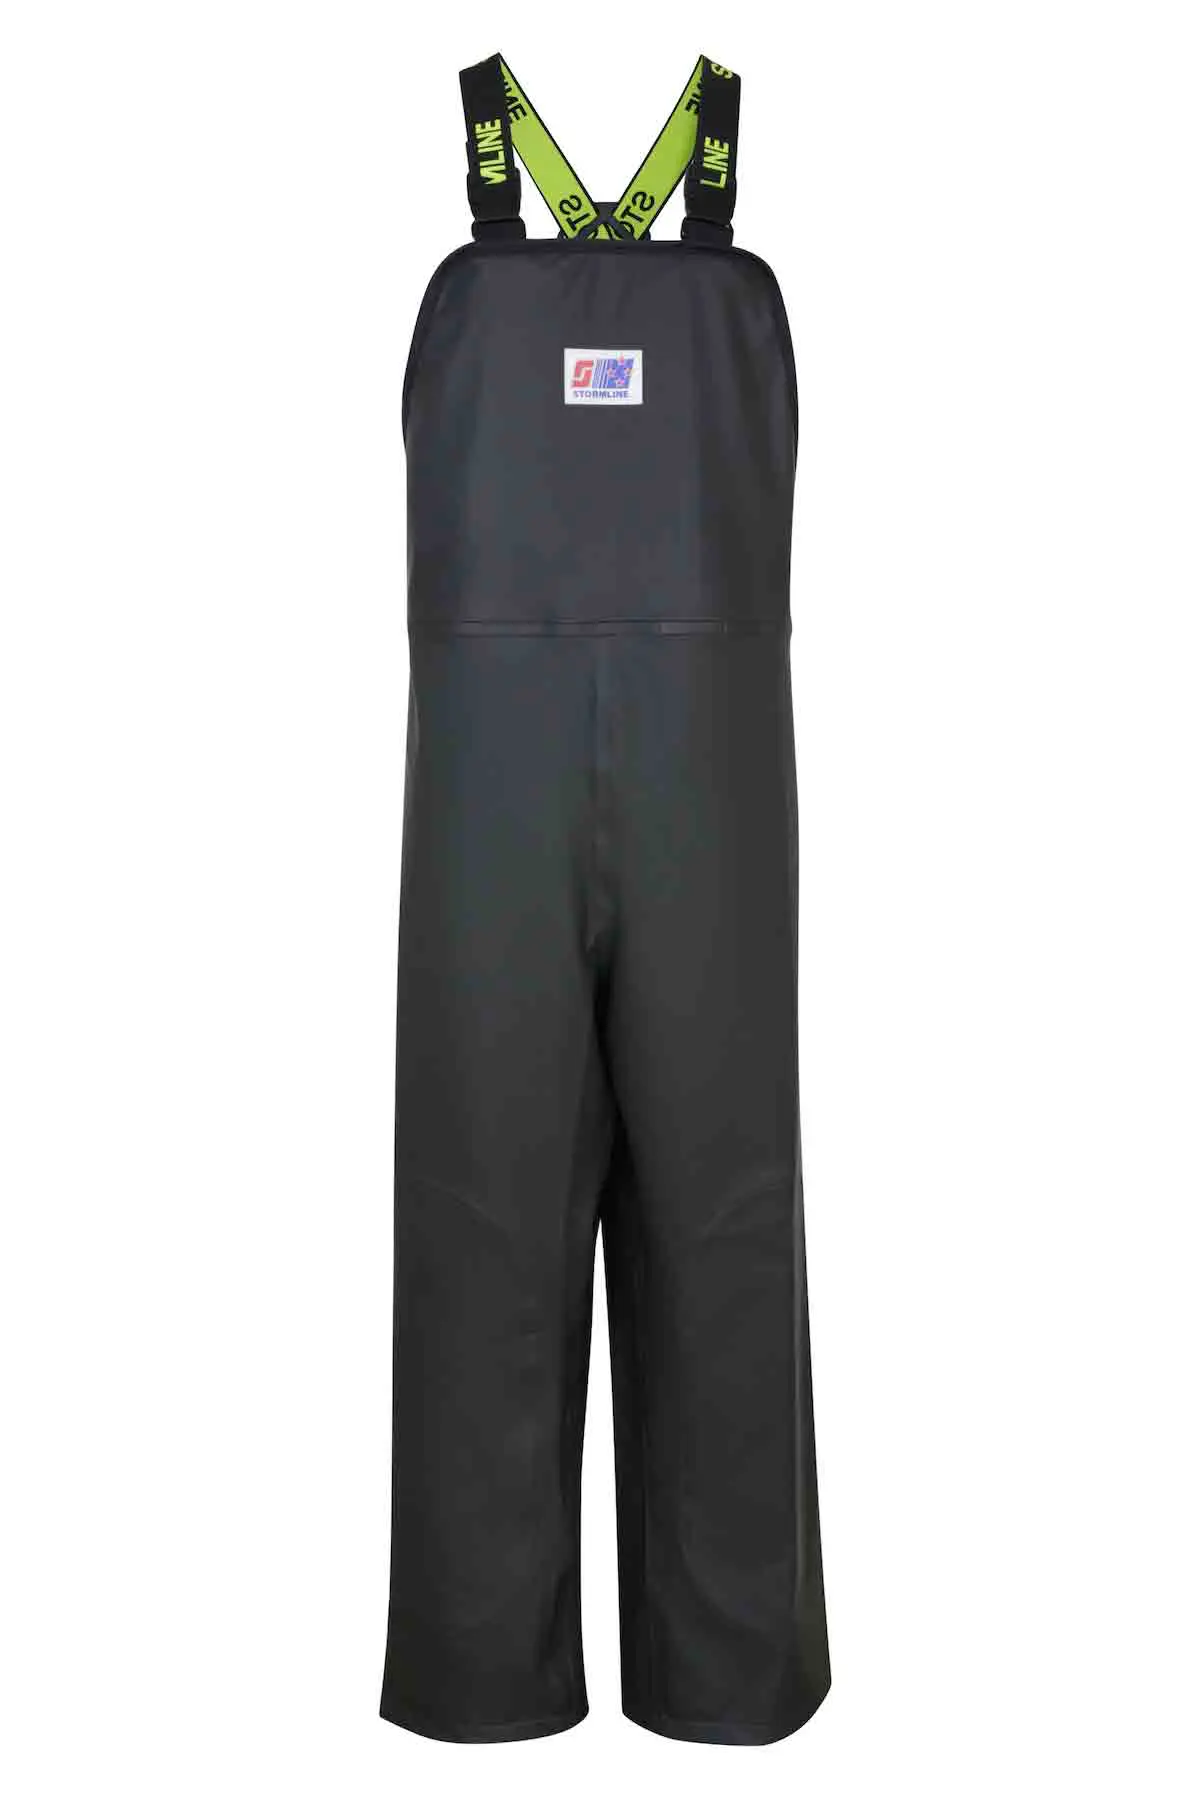 Waterproof coveralls - All industrial manufacturers